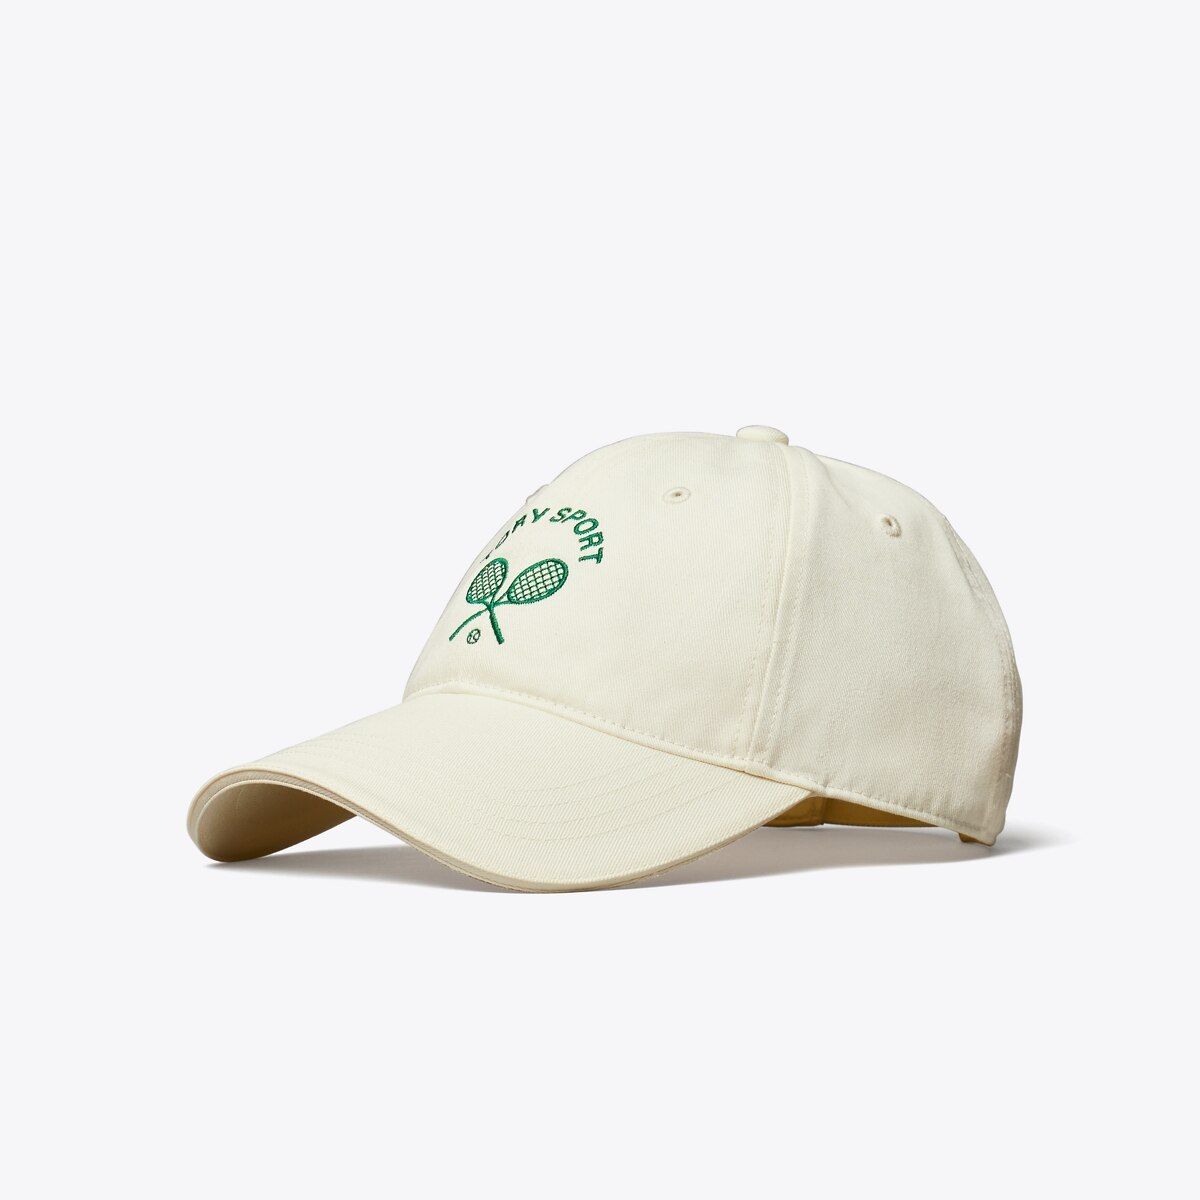 Embroidered Racquets Cap: Women's Designer Hats | Tory Sport | Tory Burch (US)